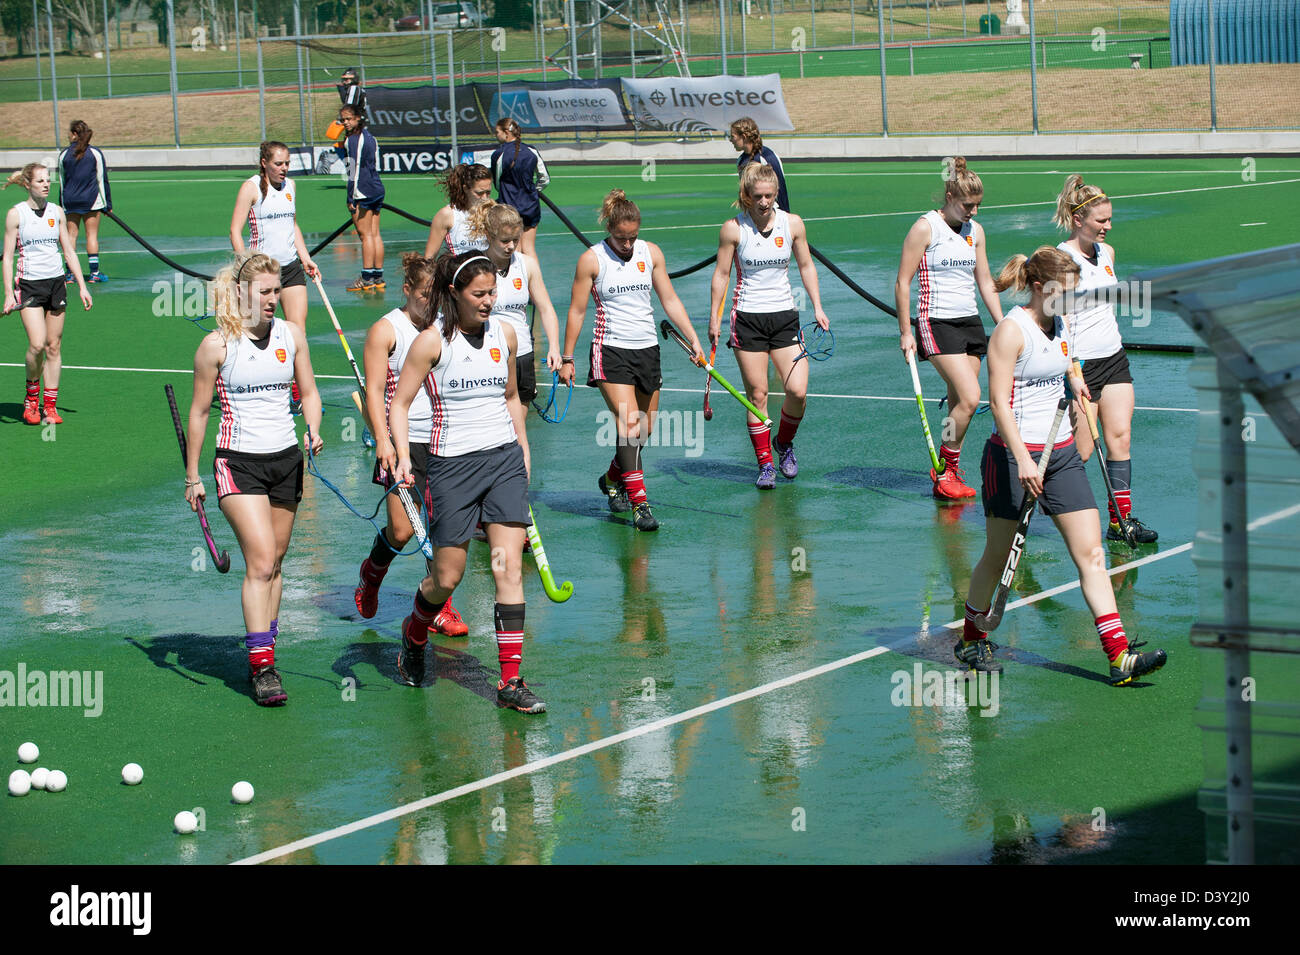 Members of the England Ladies hockey team leave the field after training at Hartleyvale stadium Cape Town South Africa Stock Photo